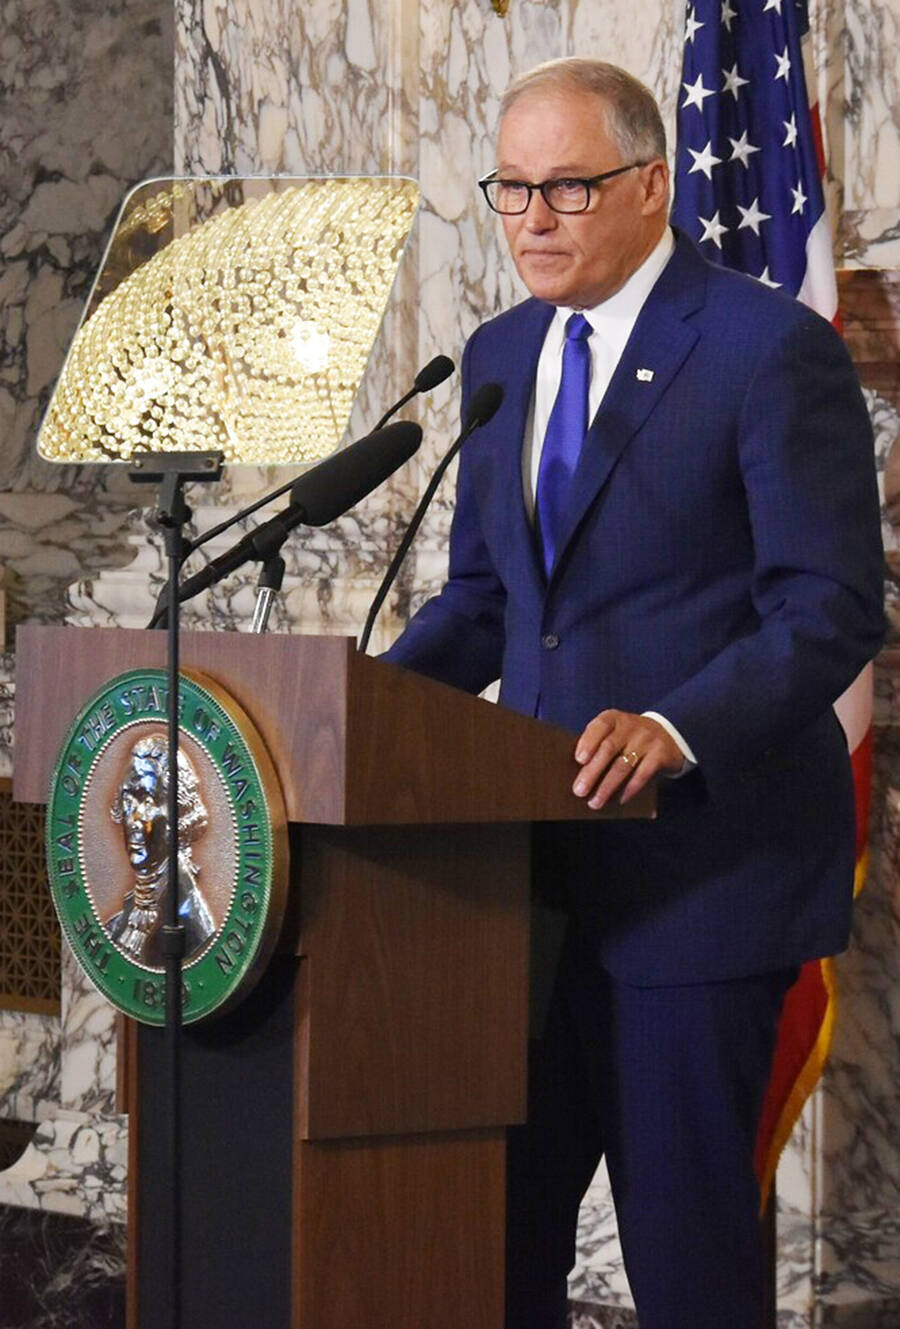 Gov. Jay Inslee delivers his annual State of the State address in the state Capitol. Governor’s office photo